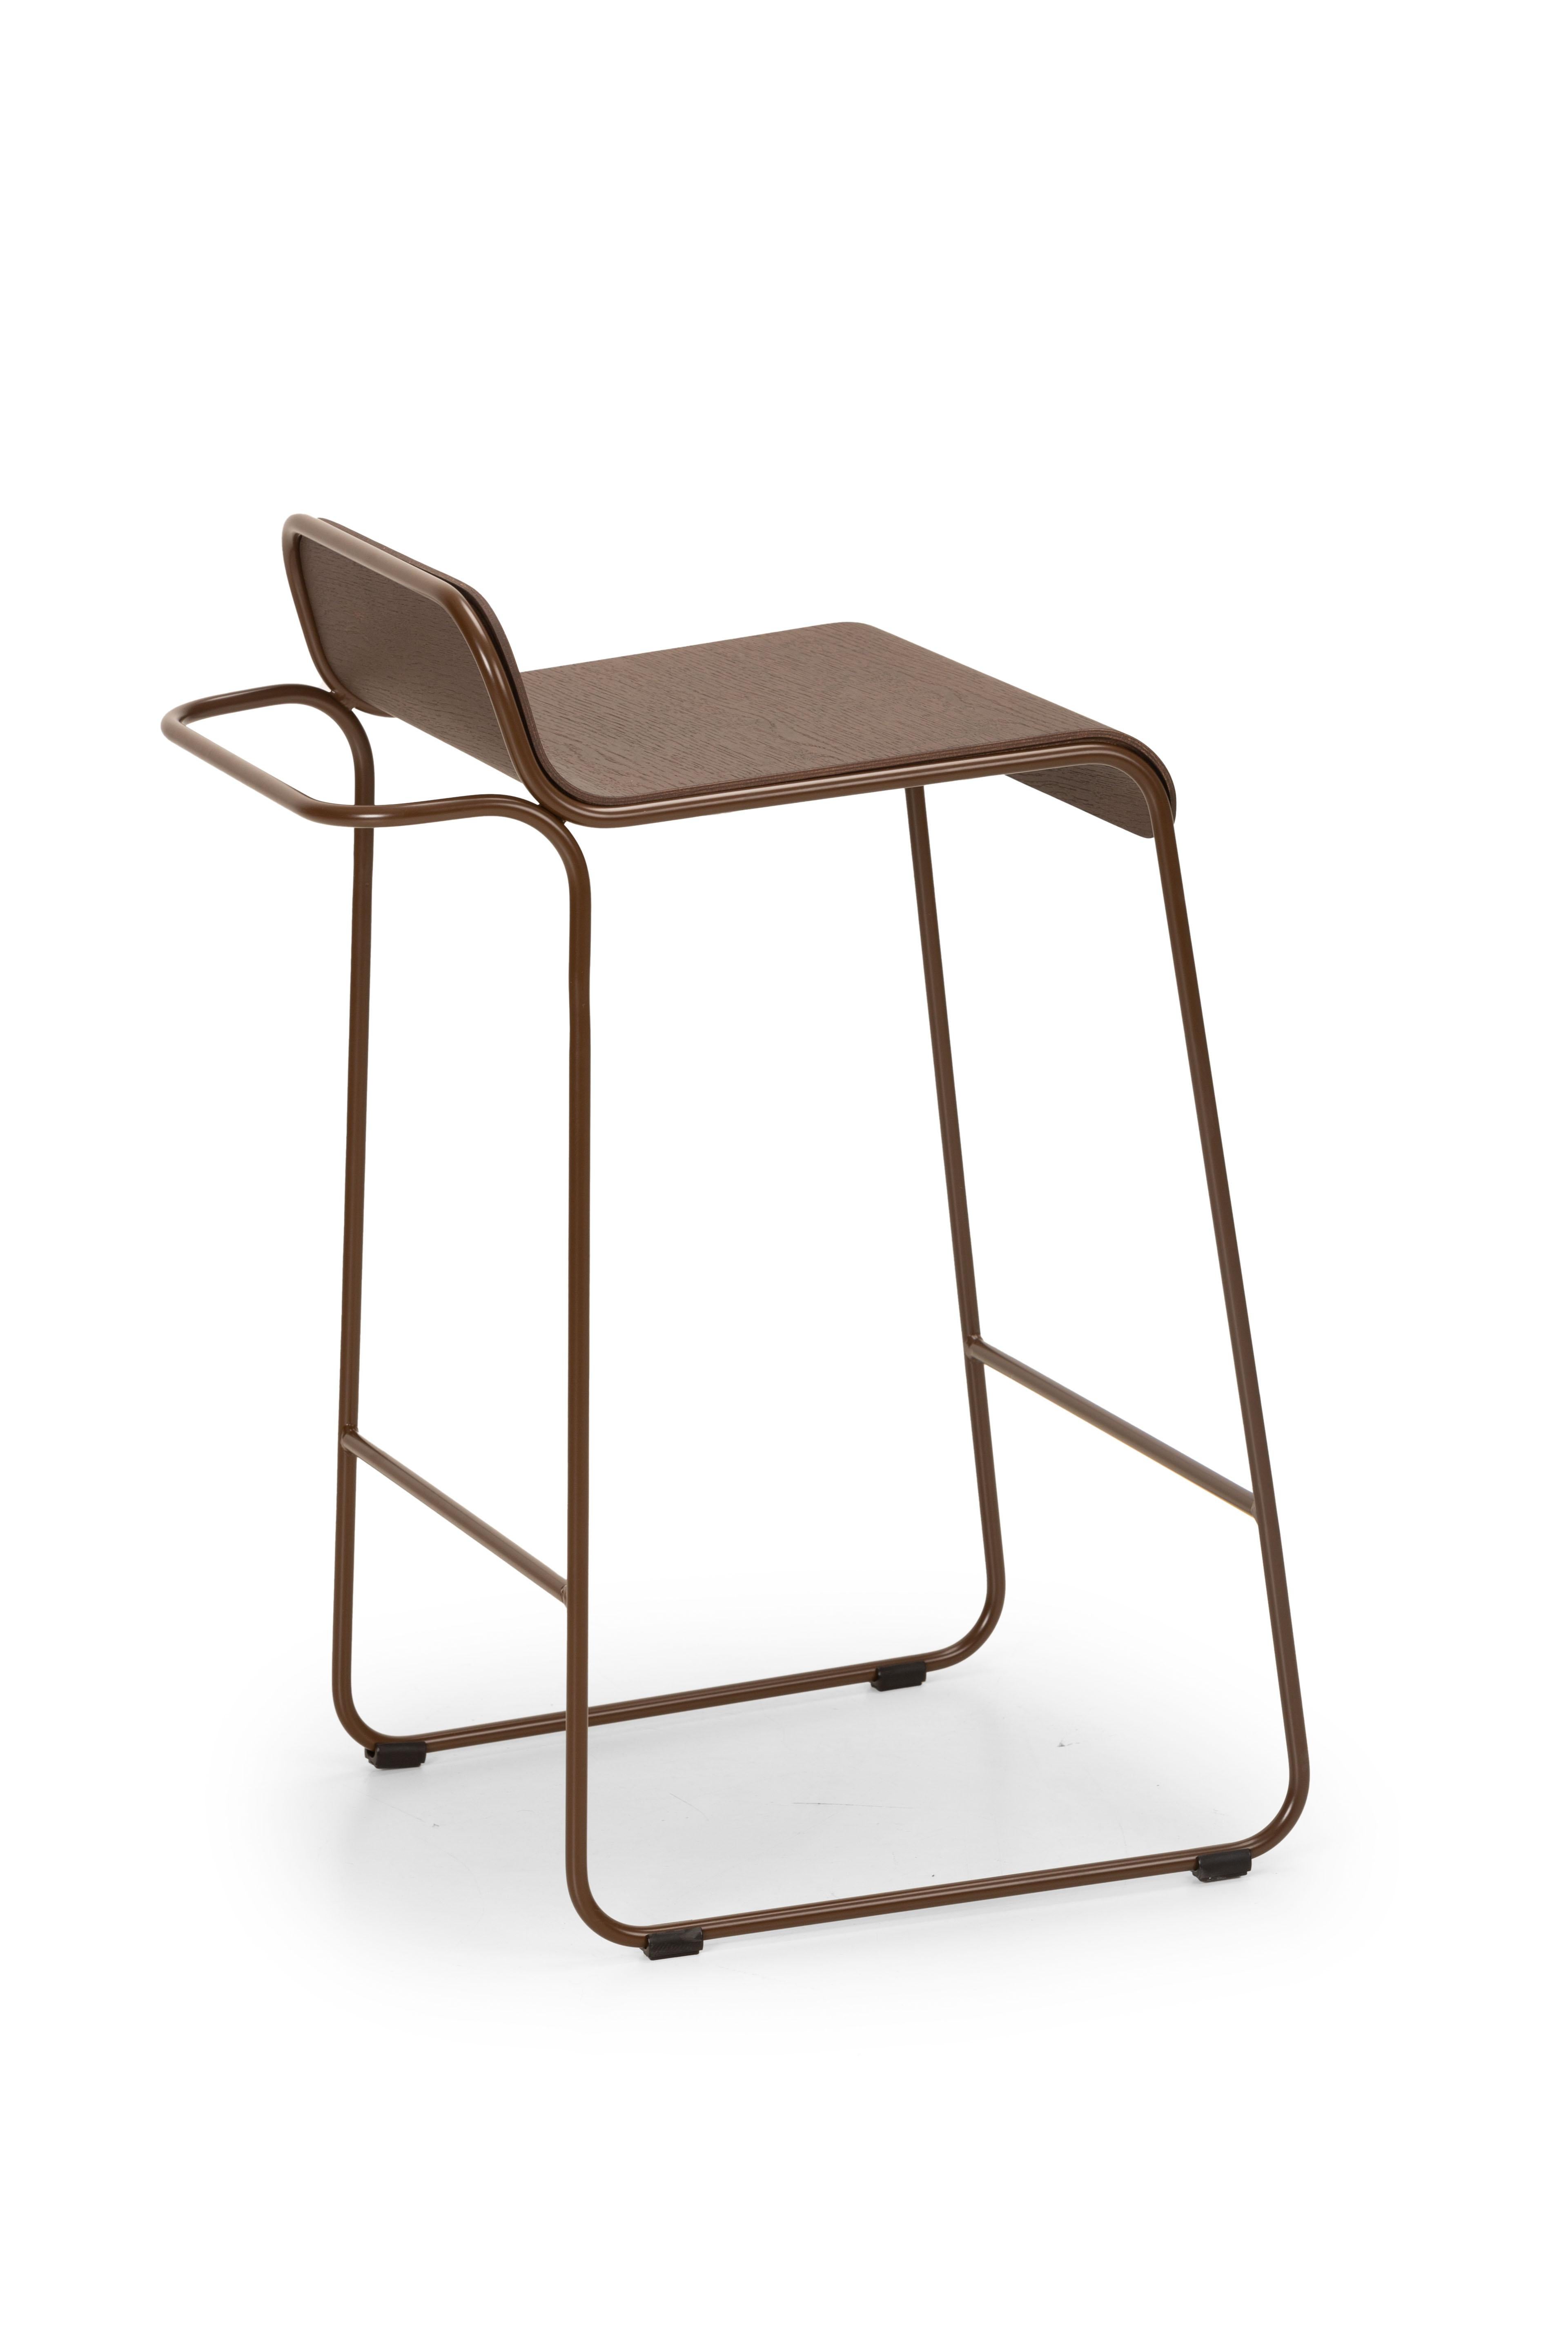 Born from a project by Defne Koz and Marco Susani, the design of this stool is shaped by a fluid and sinuous continuous line. Flow is a stool designed in three different heights to meet different ergonomic needs. On the backrest, the steel rod draws